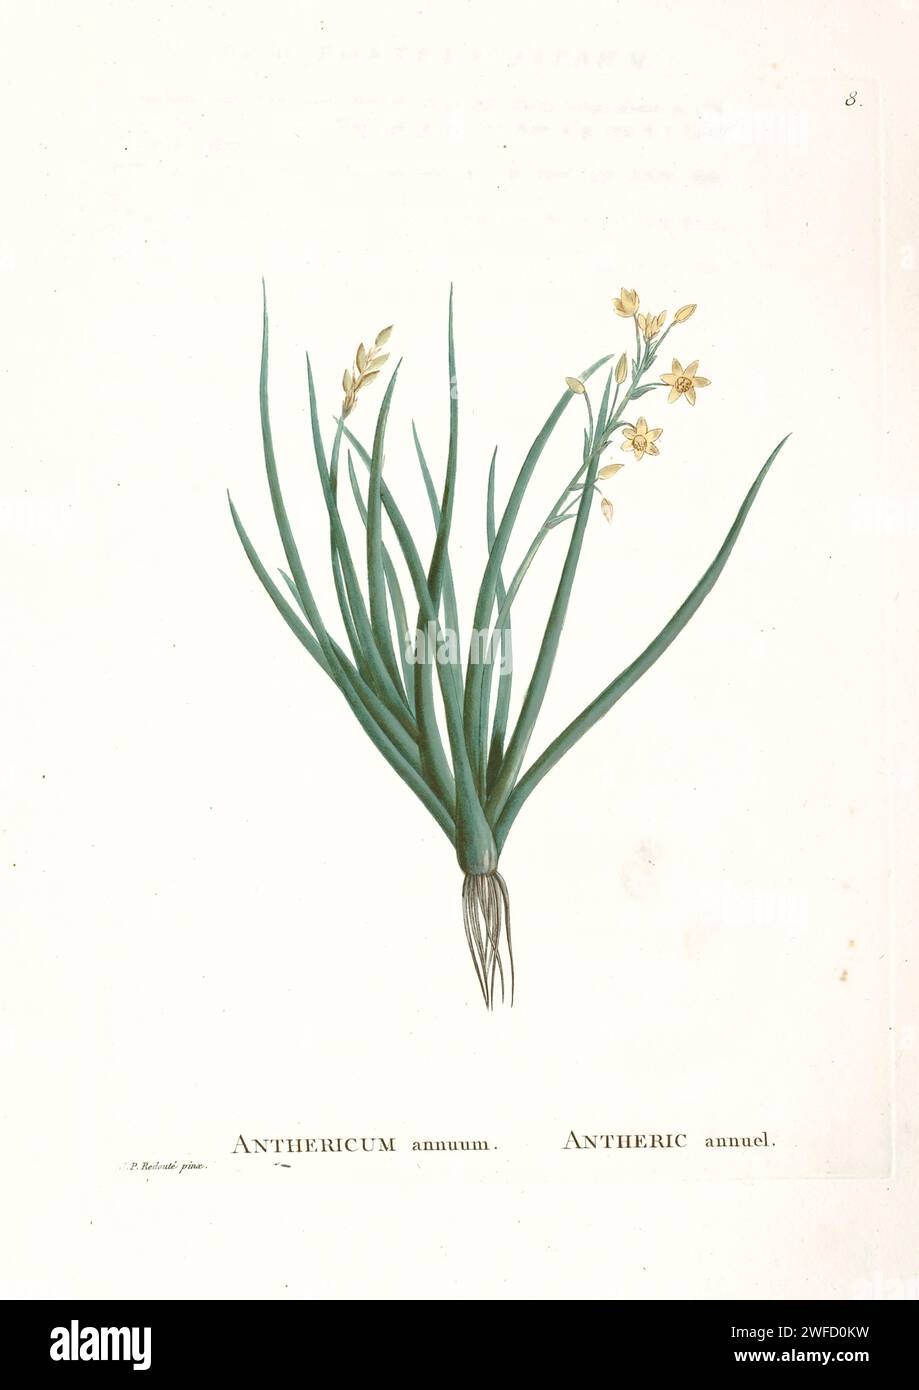 Bulbine annua (L.) Willd. Here As Anthericum annuum from History of Succulent Plants [Plantarum historia succulentarum / Histoire des plantes grasses] painted by Pierre-Joseph Redouté and described by Augustin Pyramus de Candolle Bulbine is a genus of plants in the family Asphodelaceae and subfamily Asphodeloideae, named for the bulb-shaped tuber of many species. It was formerly placed in the Liliaceae. It is found chiefly in Southern Africa, with a few species extending into tropical Africa and a few others in Australia and Yemen Stock Photo